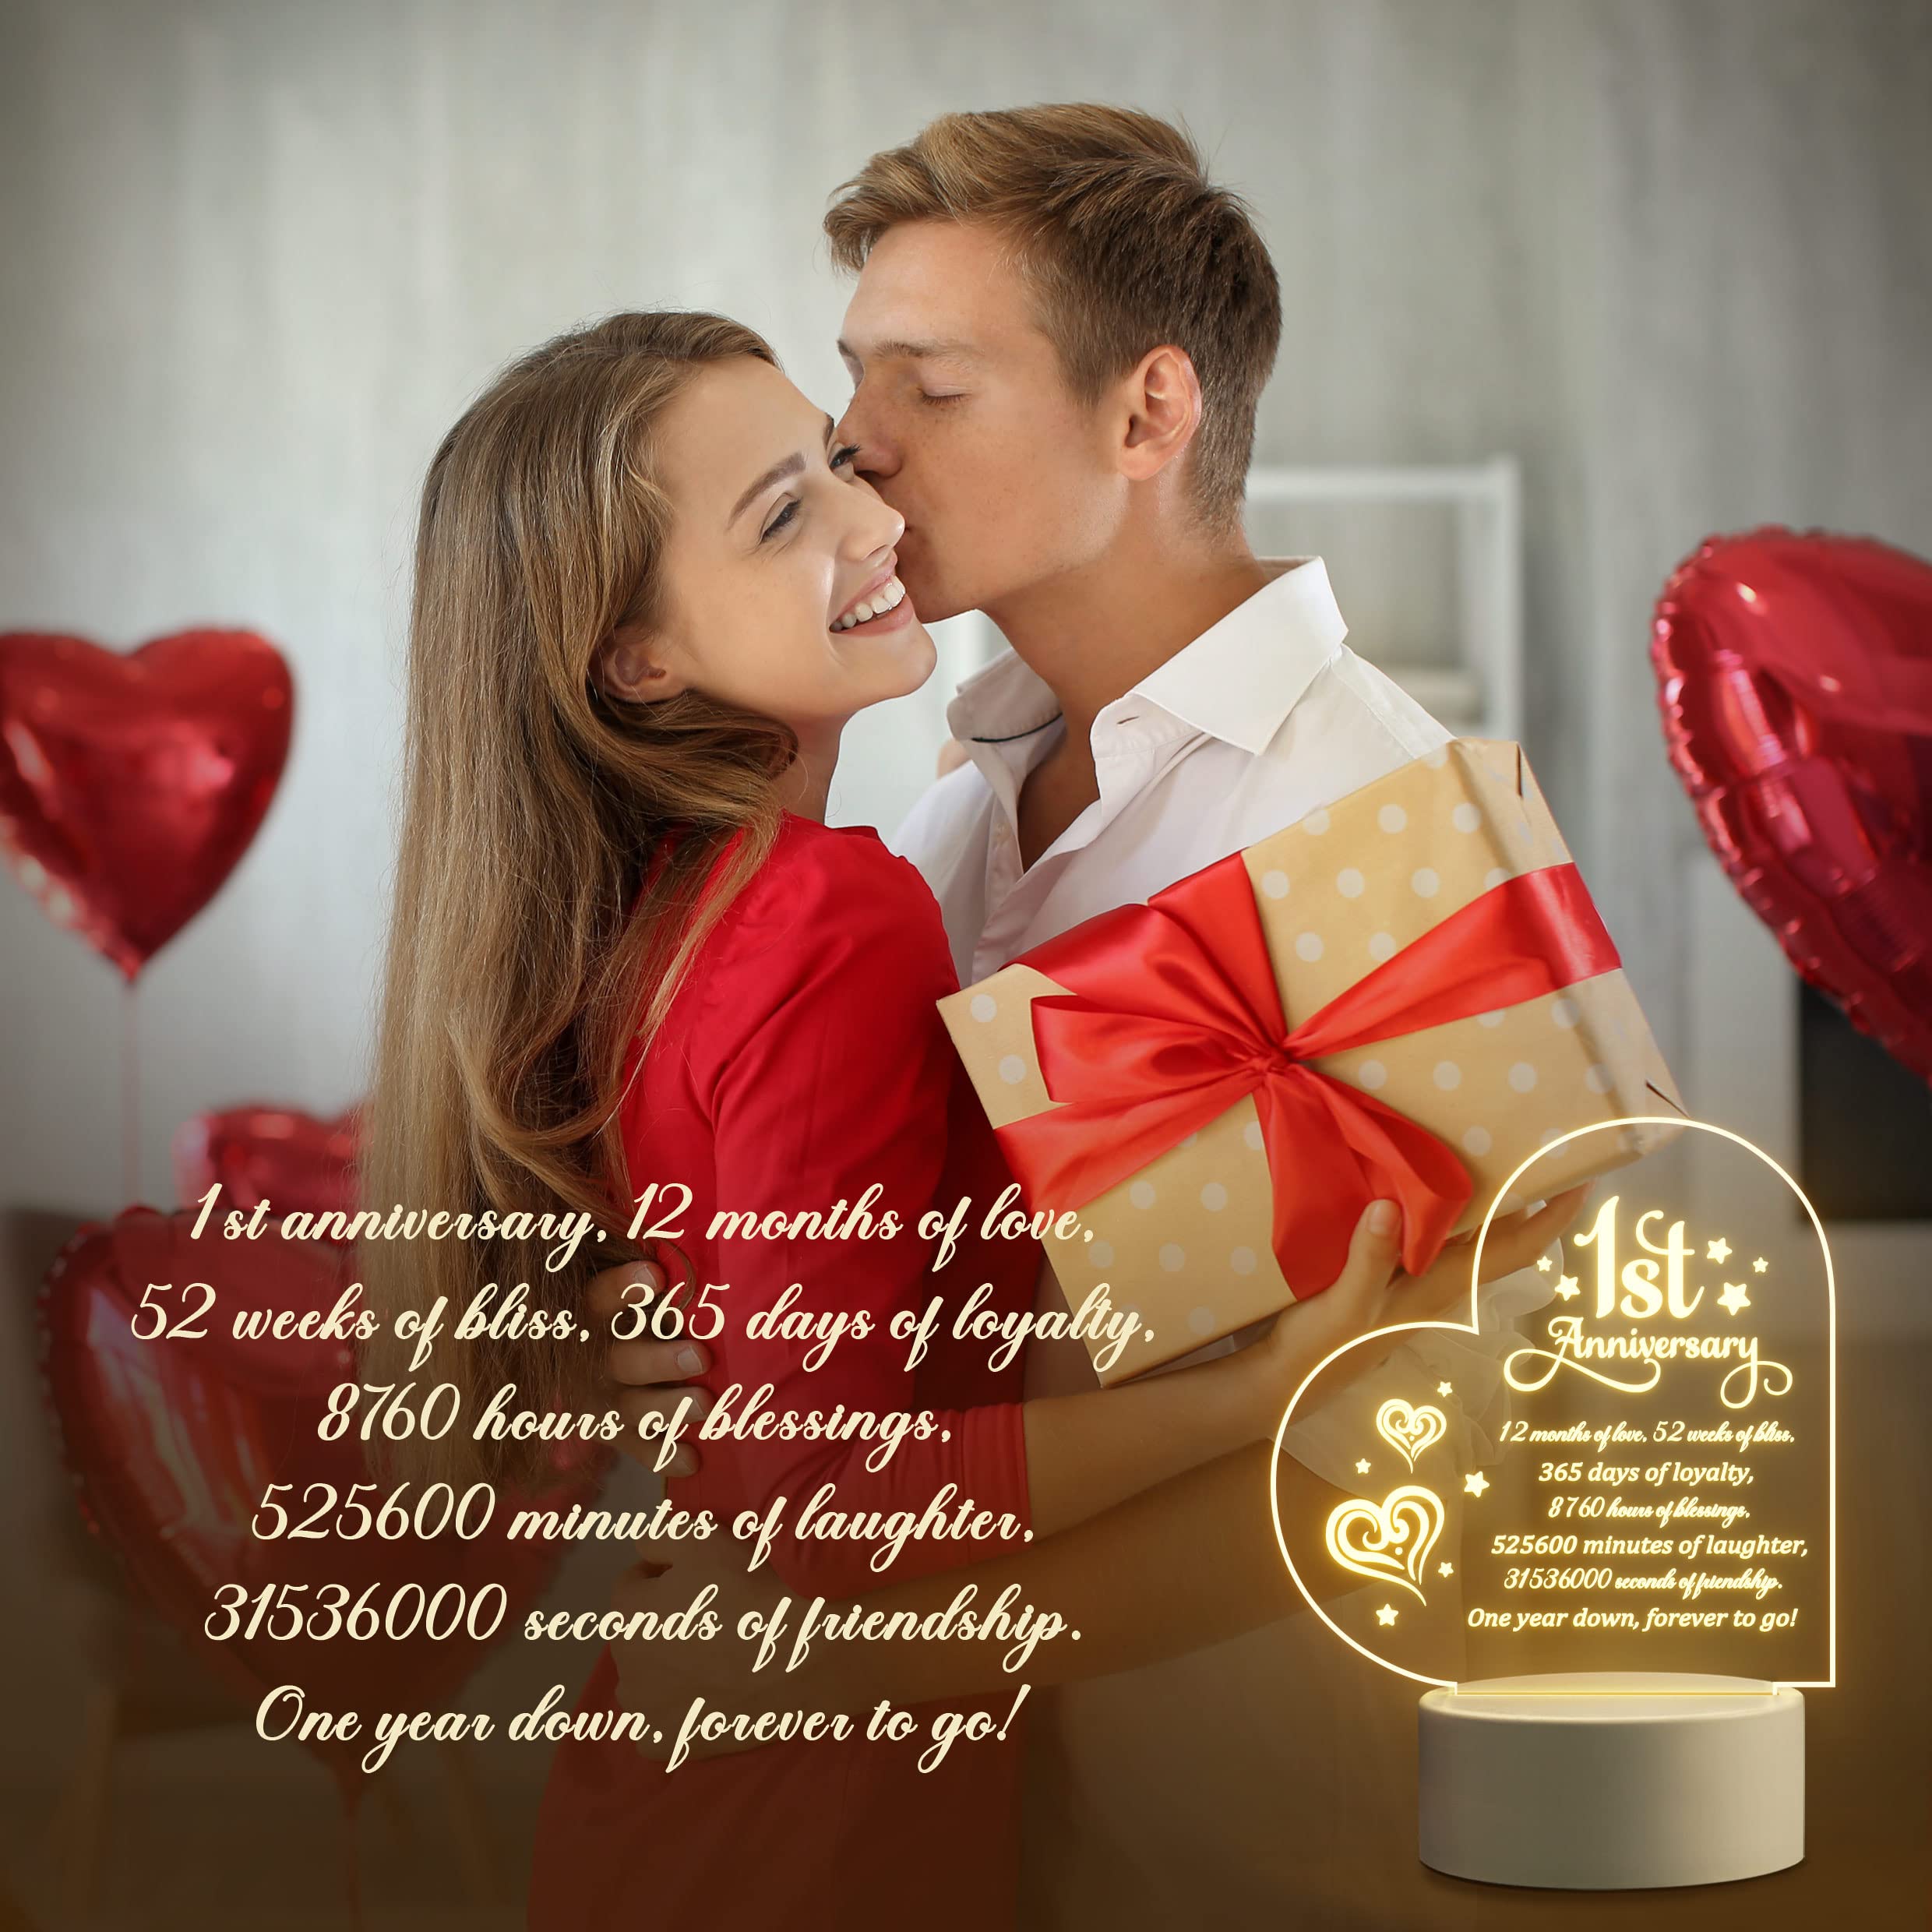 Reasons Why I Love You, Personalised Valentines Day Gift, Gift for Him, Anniversary  Gifts for Boyfriend, Boyfriend Birthday Gift 